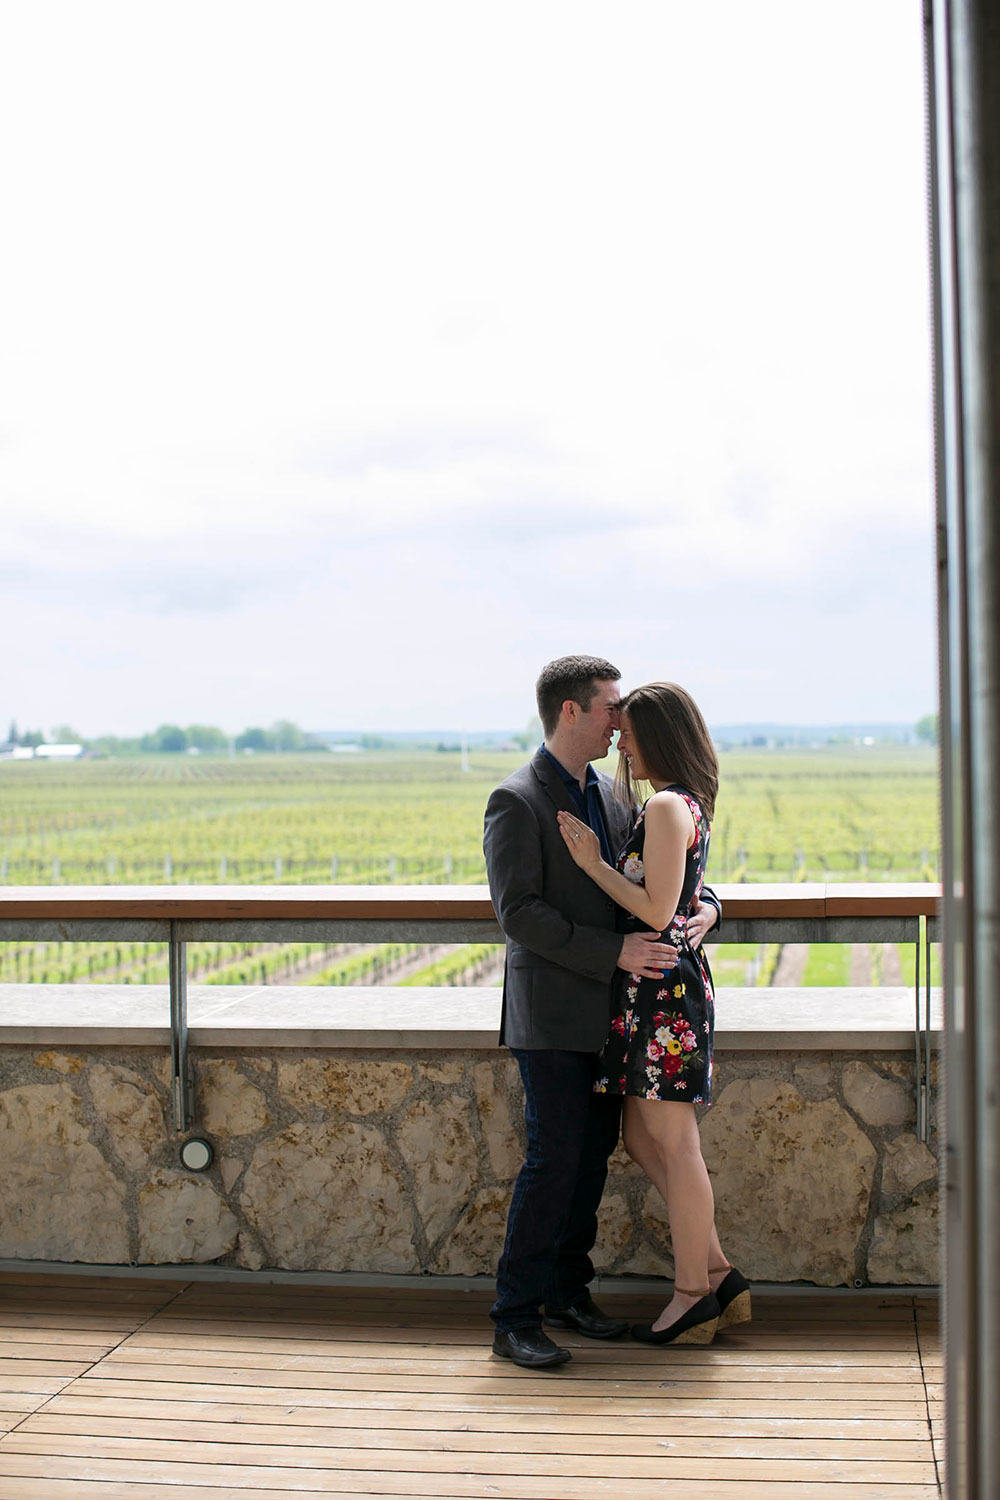 Niagara-on-the-Lake-proposals-Jackson-Triggs-Winery-photo-by-philosophy-studios-027.JPG